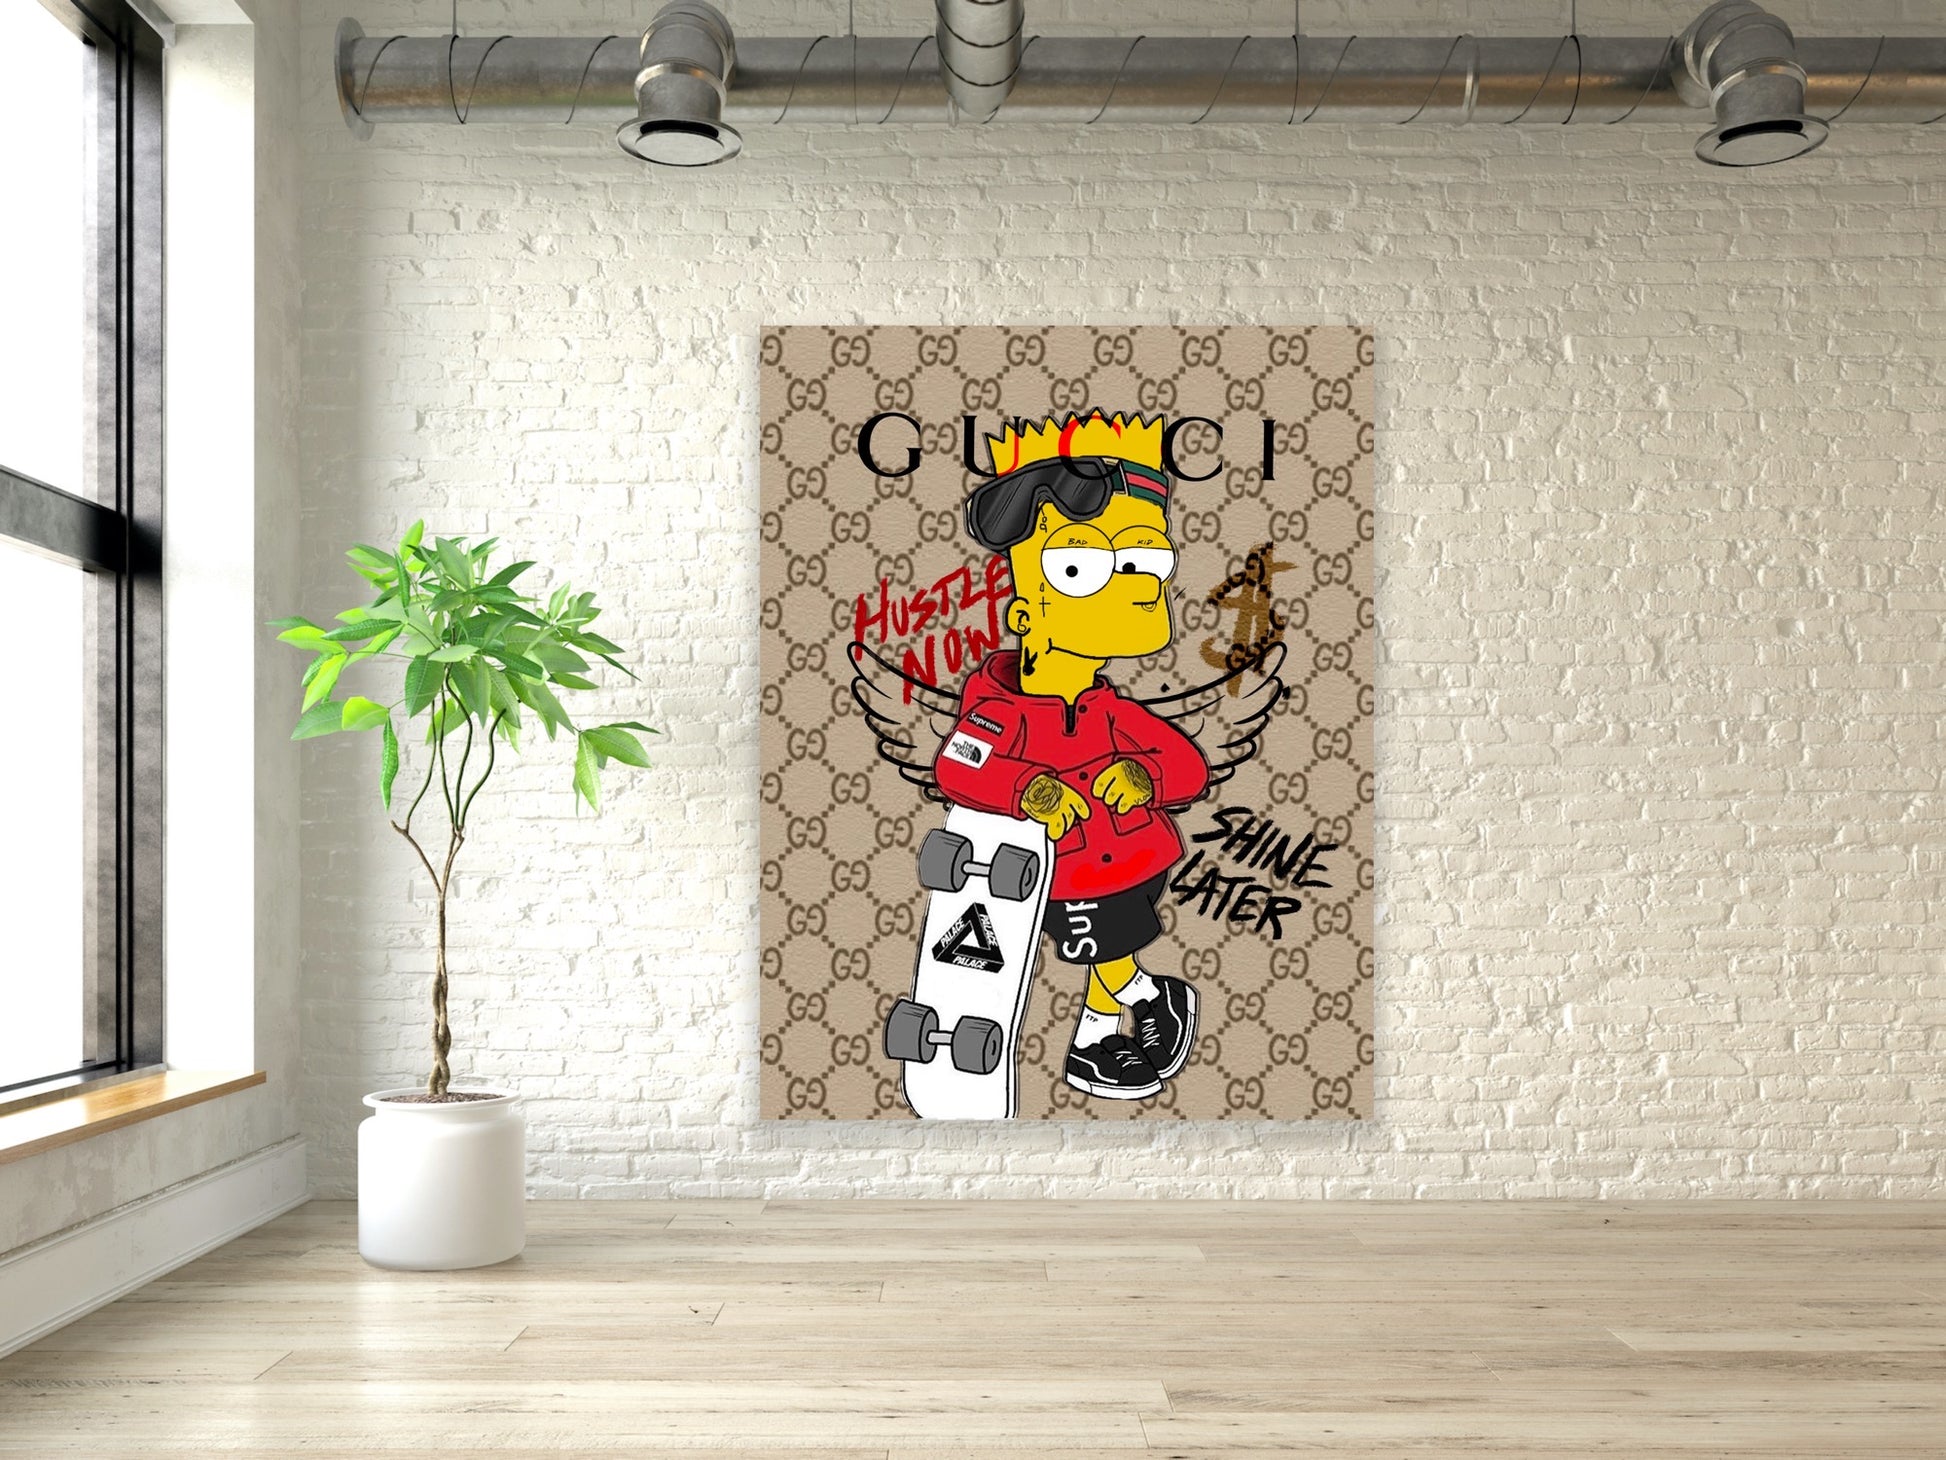 Bart Simpson's canvas prints adorn a finely-crafted frame, detailed with iconic Gucci motifs and the inspiring message of “hustle now, shine later